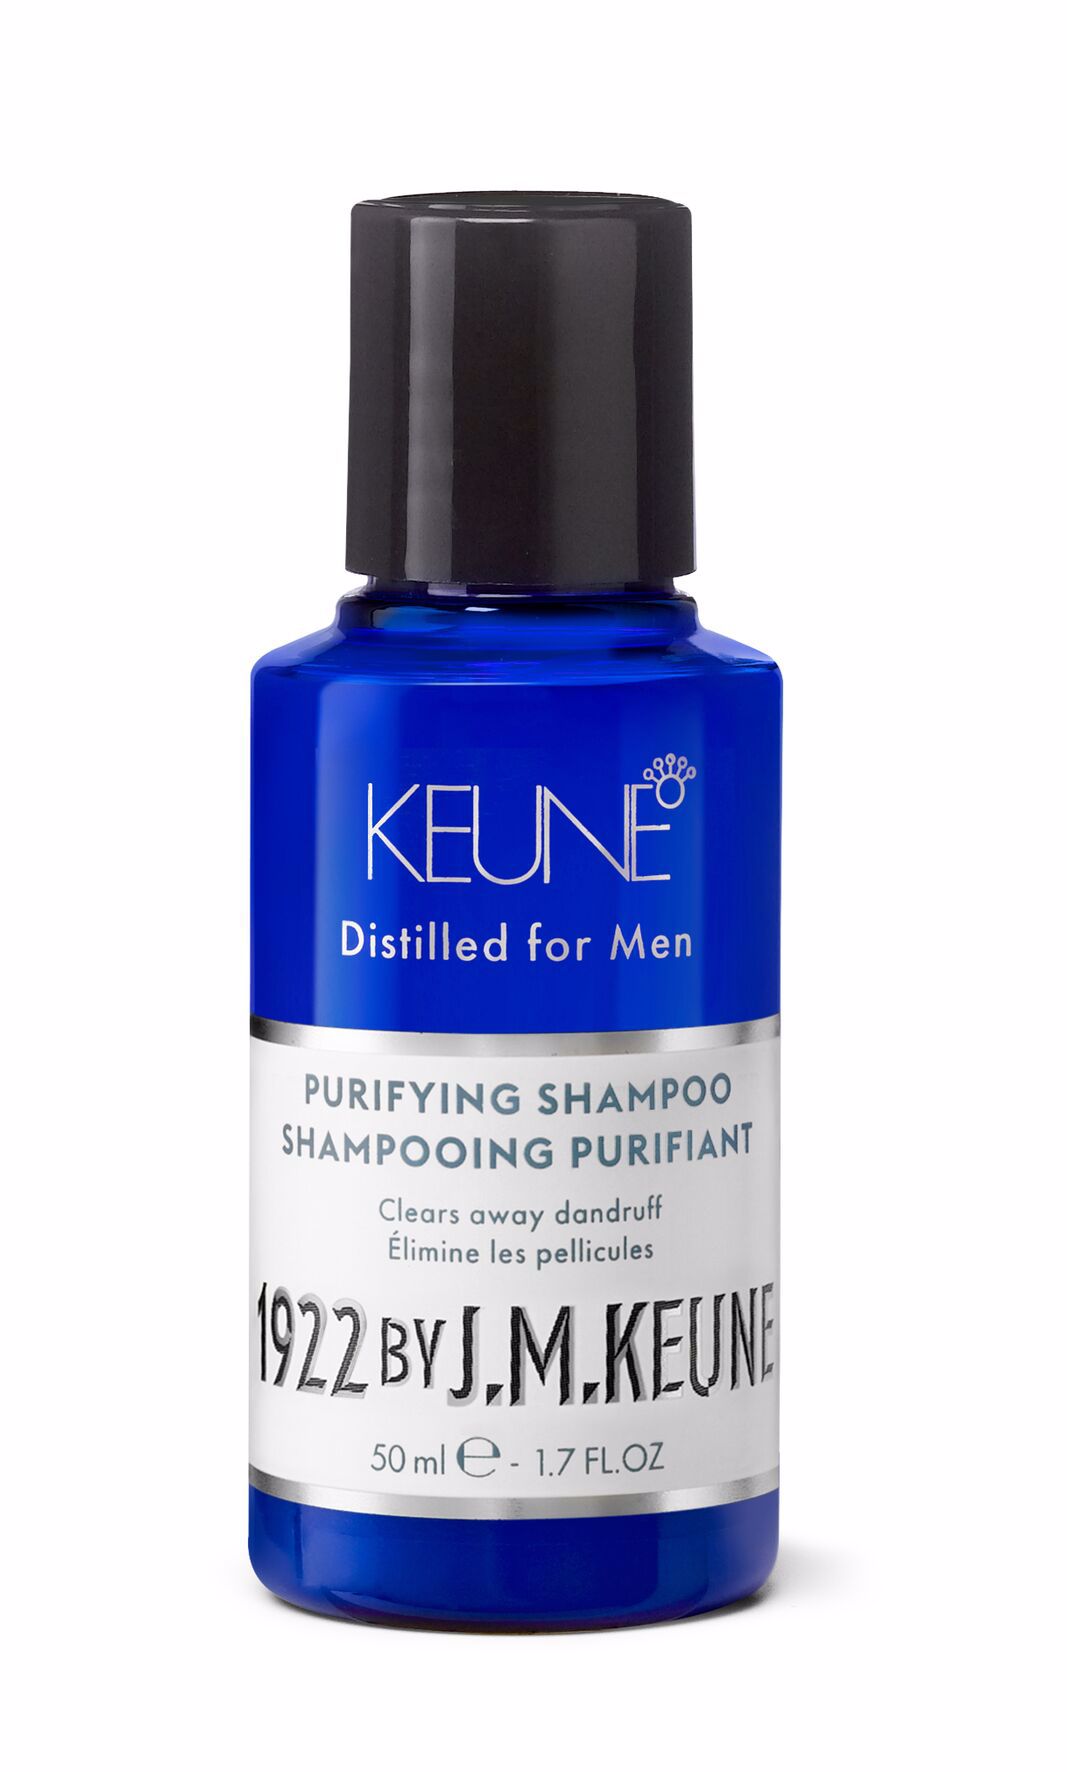 The 1922 Purifying Shampoo is the solution for oily hair in men. Dandruff-free thanks to zinc pyrithione, it strengthens with creatine. Learn more on our online hair shop Keune.ch.